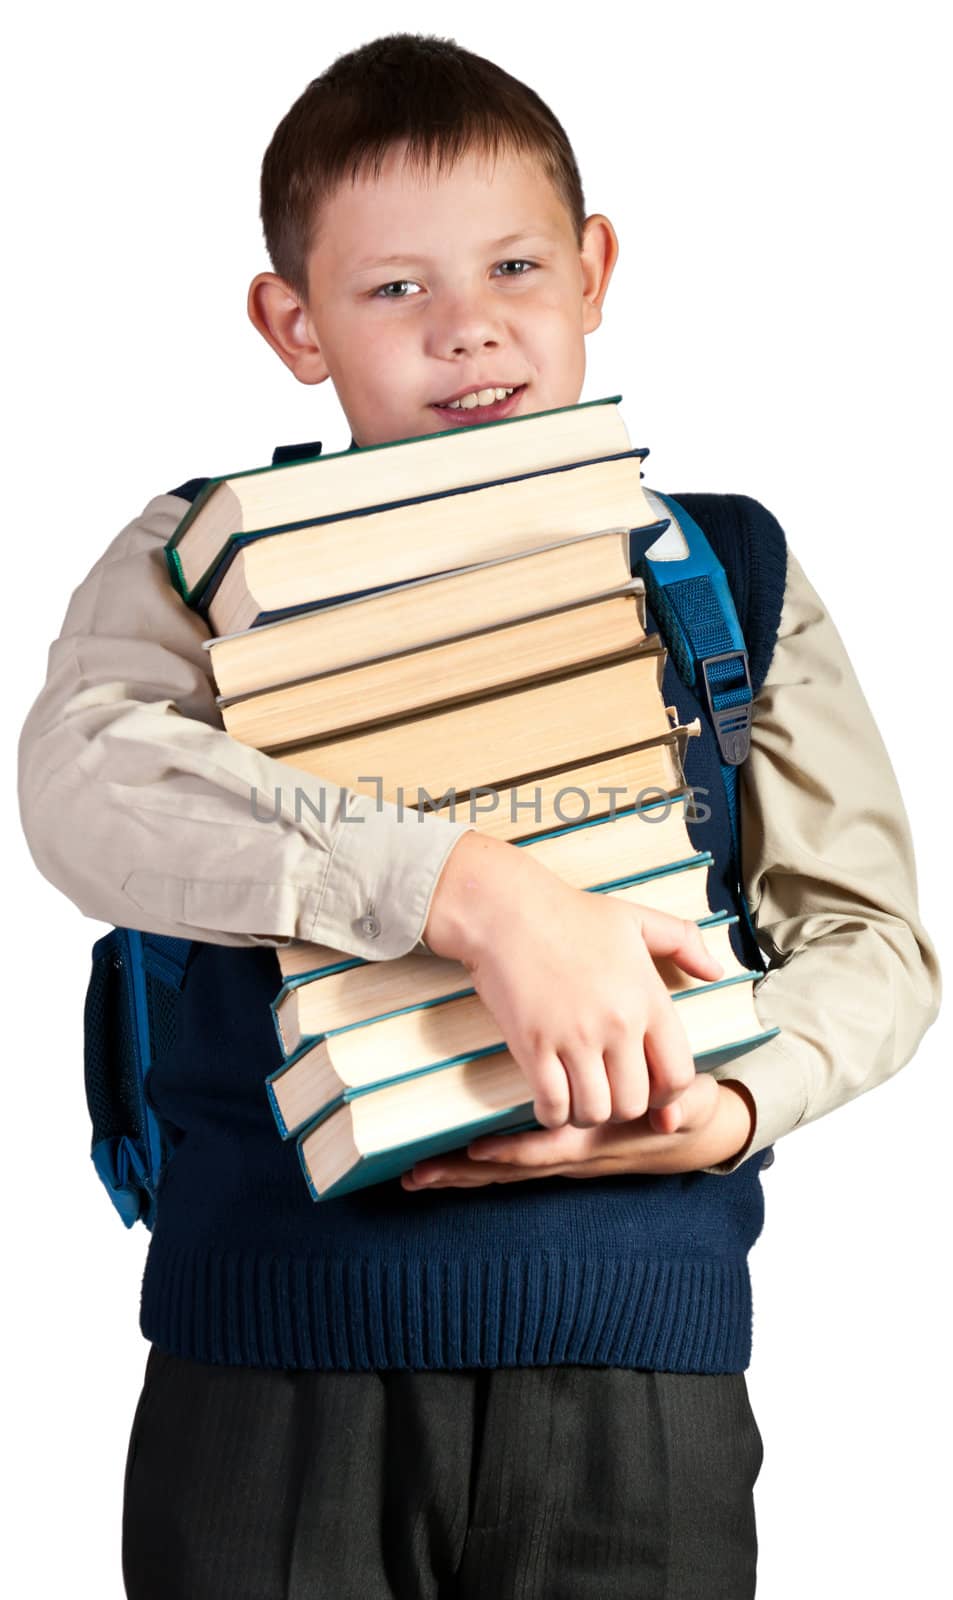 Schoolboy. Isolated over white background. The boy is dressed in a vest.